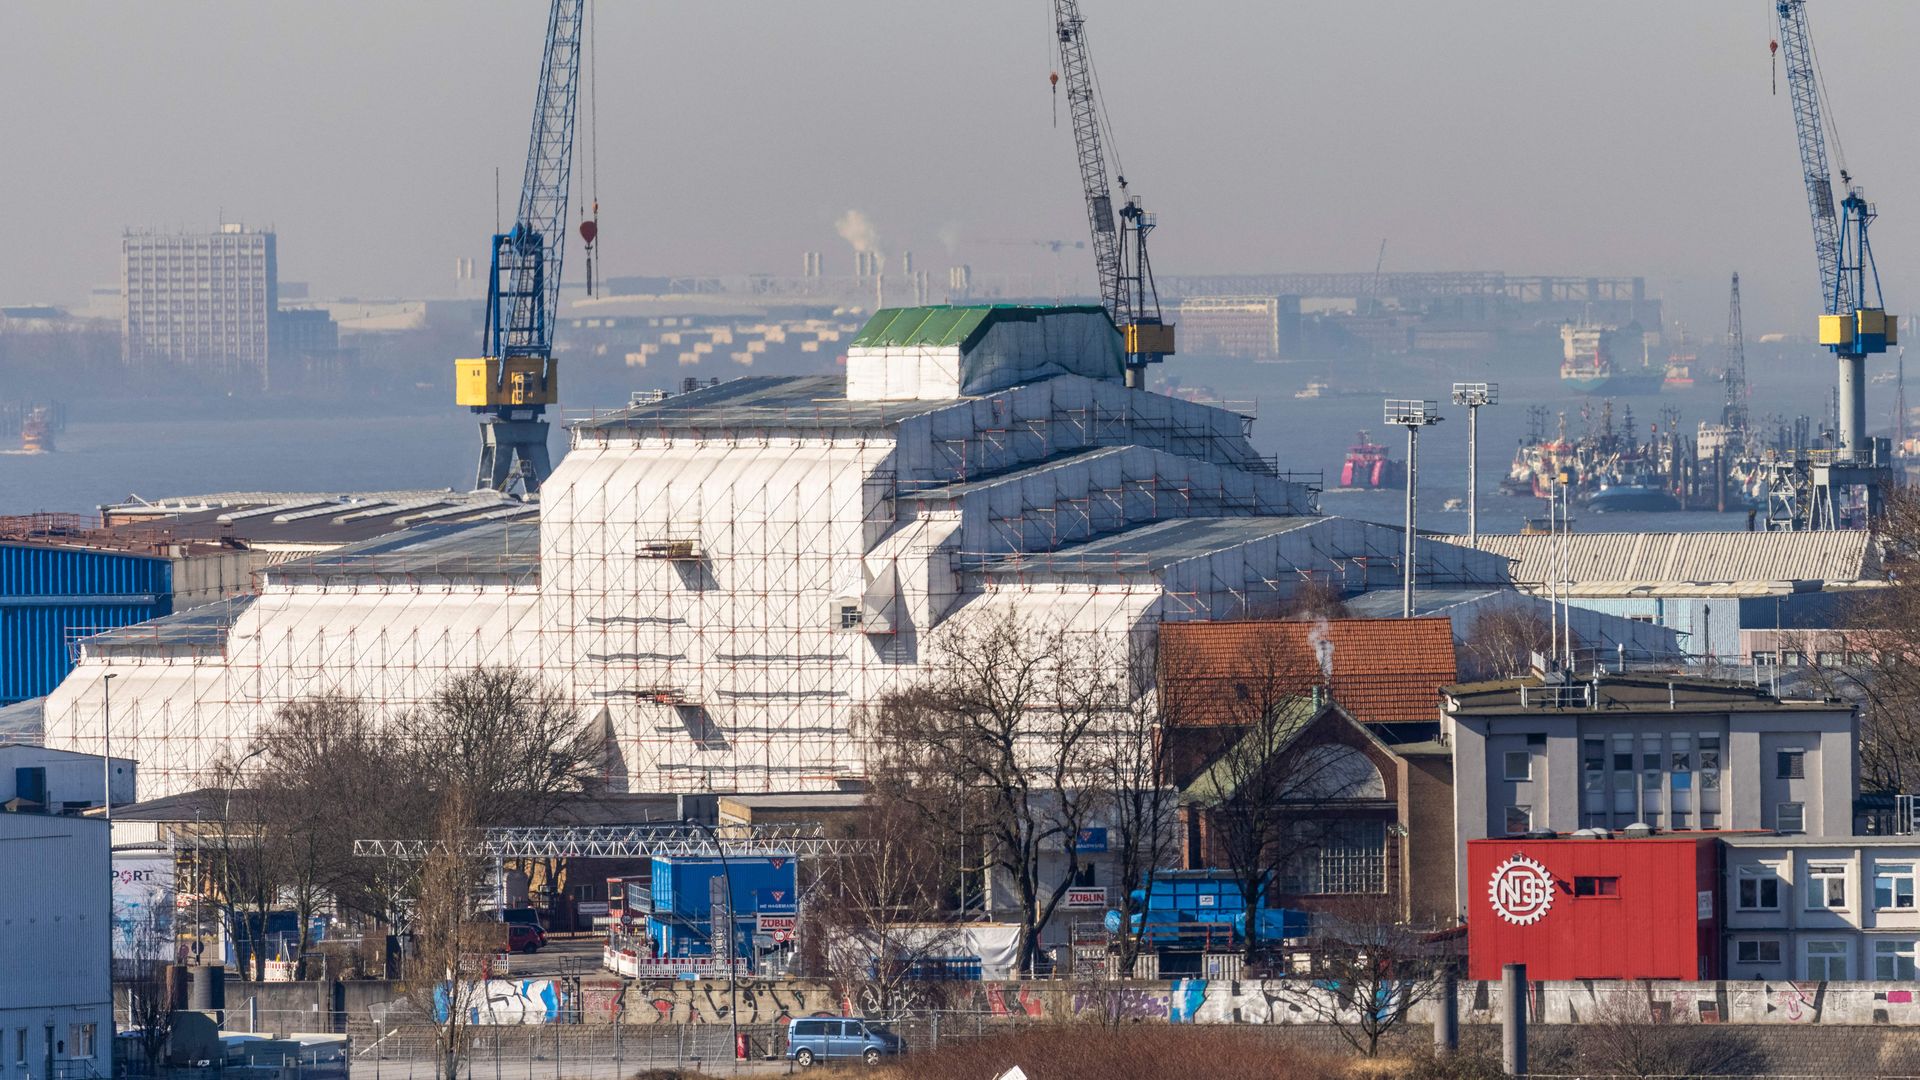 A giant scaffolding covered in tarpaulin covers the super-yacht "Dilbar" lying in dry dock compound on the river Elbe at the harbour in Hamburg, northern Germany, on March 7.